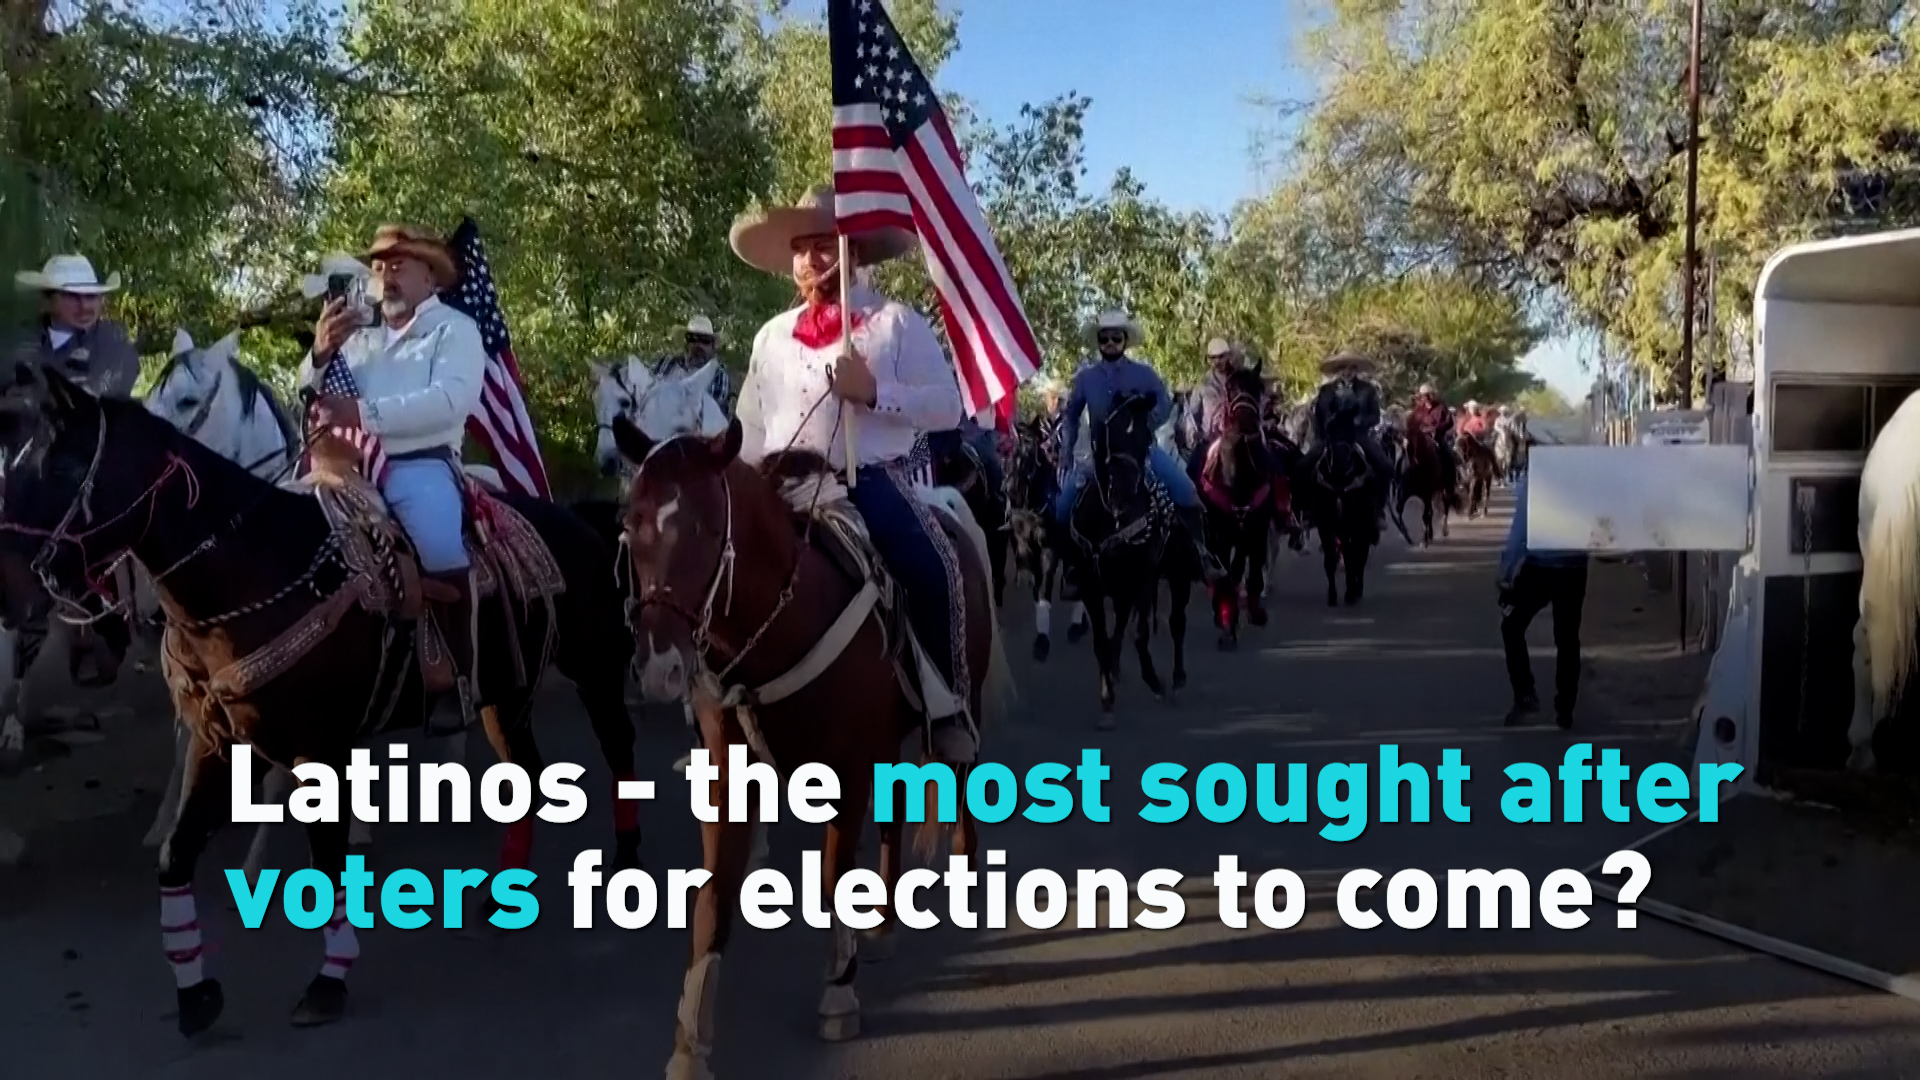 Latinos - the most sought after voters for U.S. elections to come?